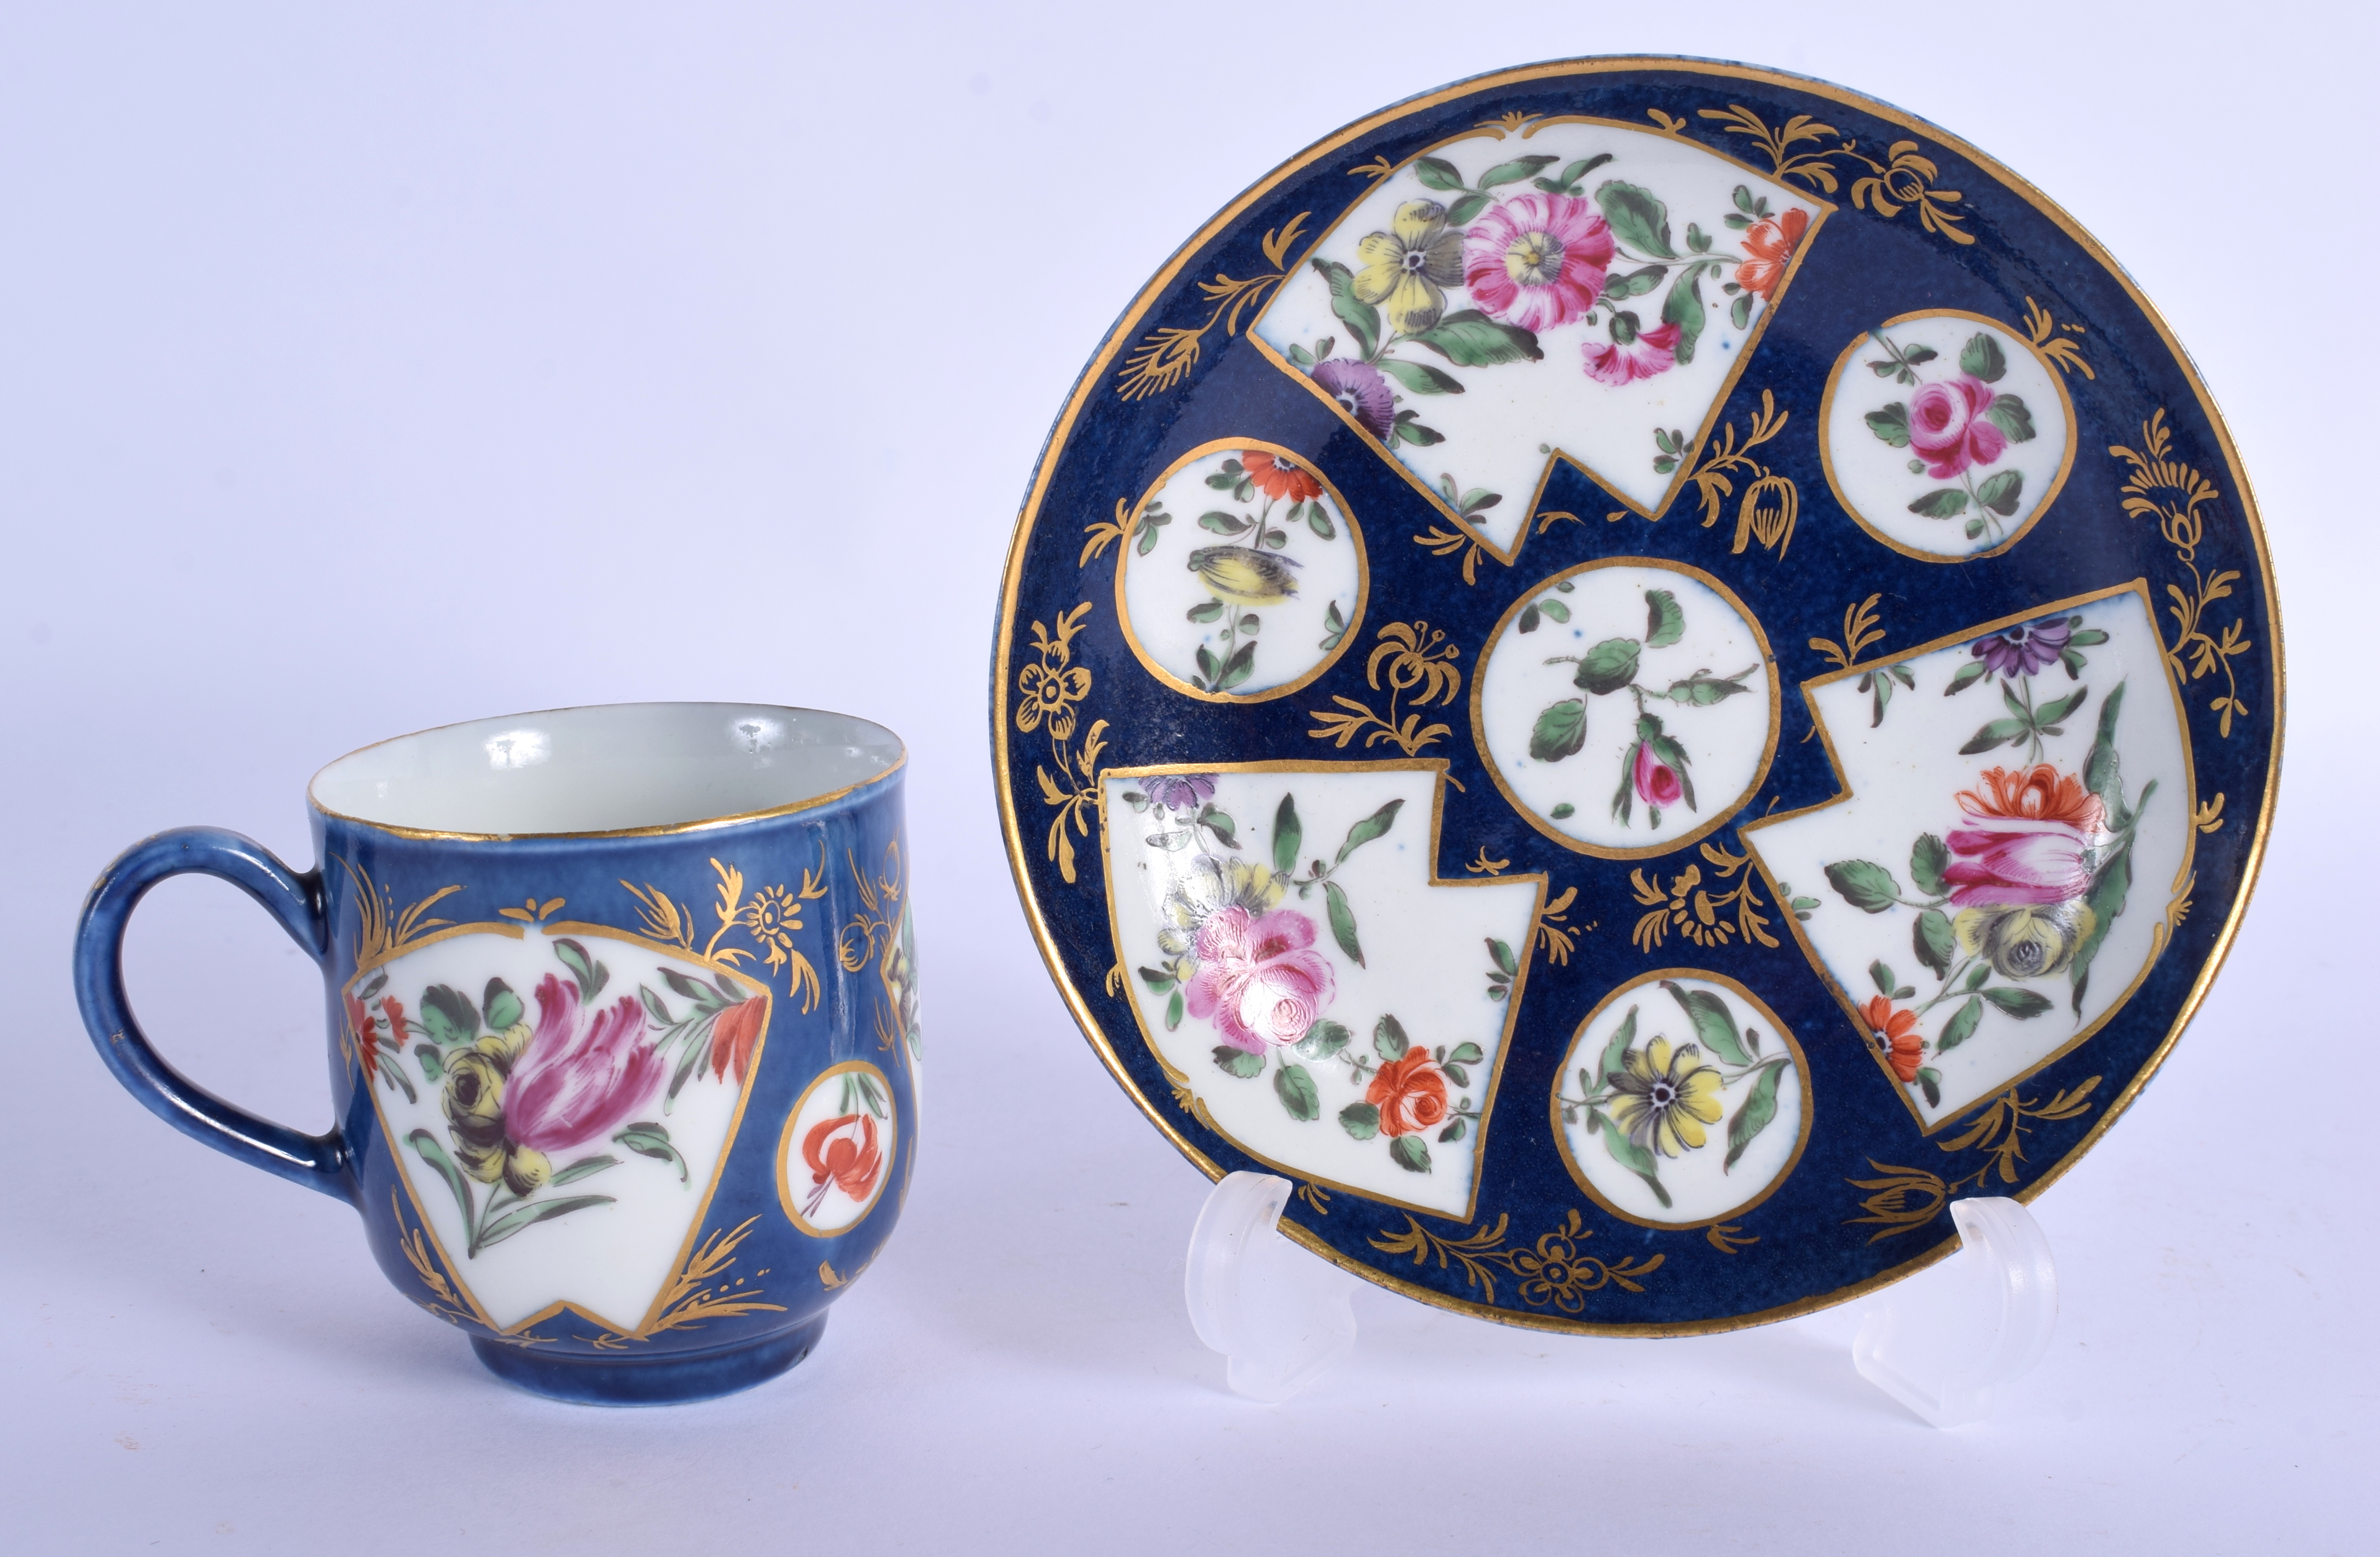 A FINE 18TH CENTURY WORCESTER COFFEE CUP AND SAUCER painted with flowers on a blue fan ground. Sauce